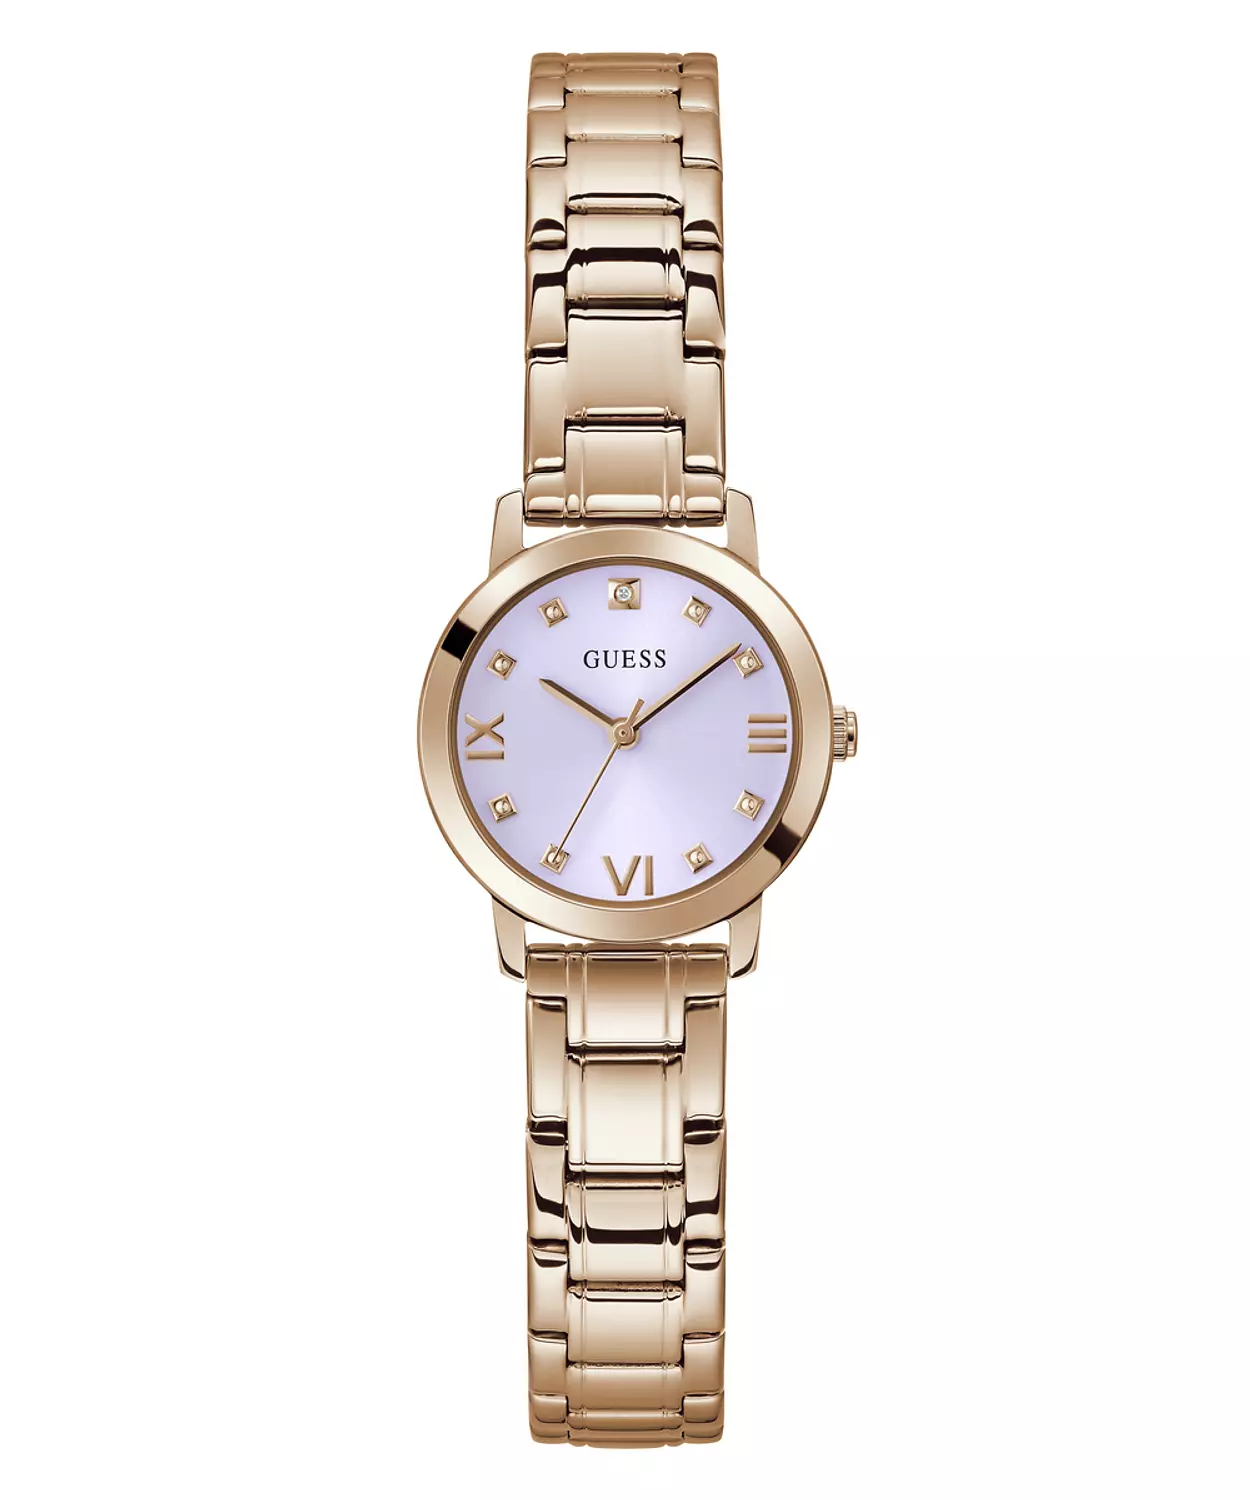 GUESS GW0532L3 ANALOG WATCH For Women Round Shape Rose Gold Stainless Steel Polished Bracelet 0